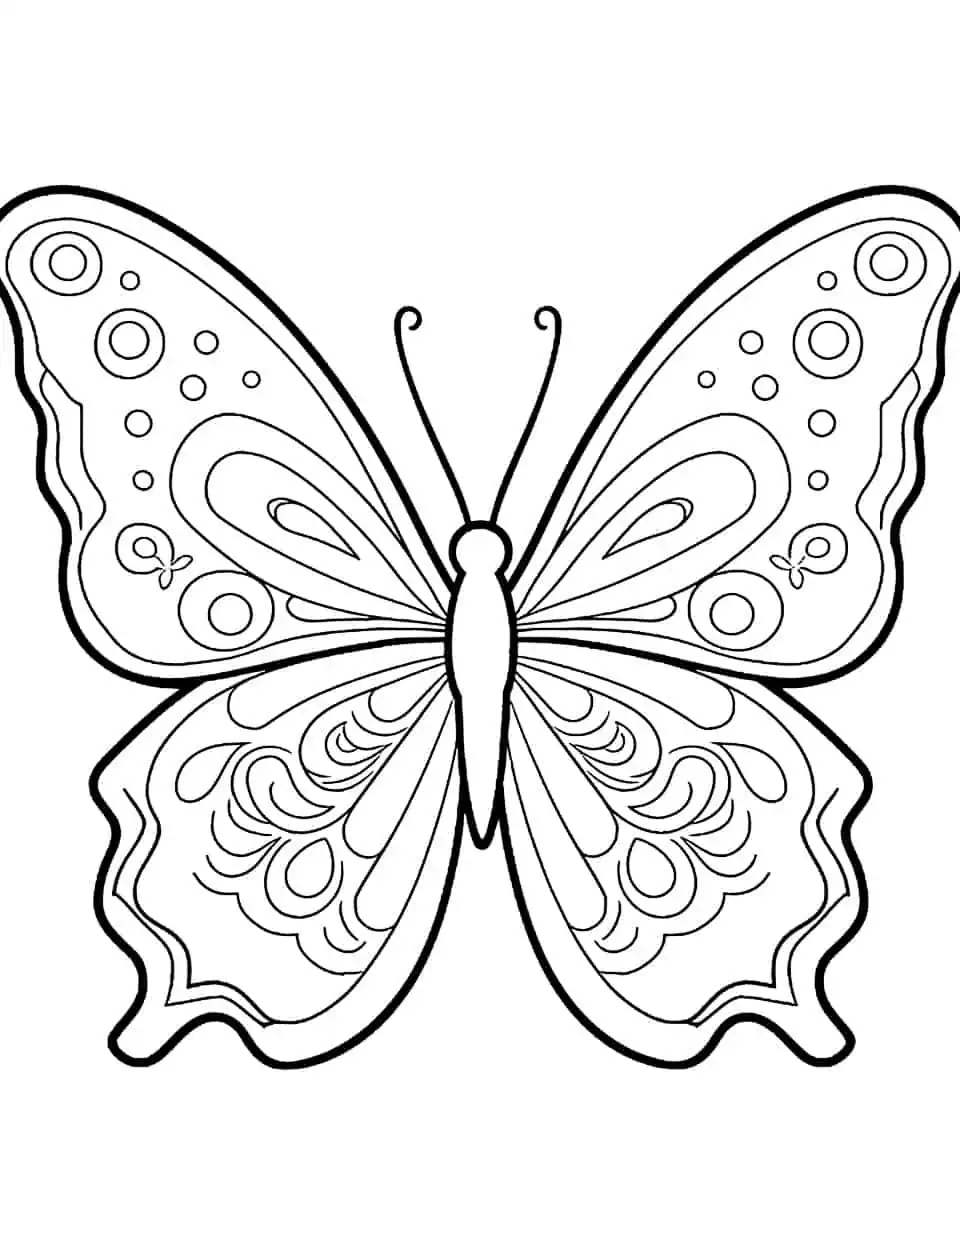 Artistic Exploration Butterfly Coloring Page - A coloring page encouraging kids to create their own butterfly designs using different patterns.